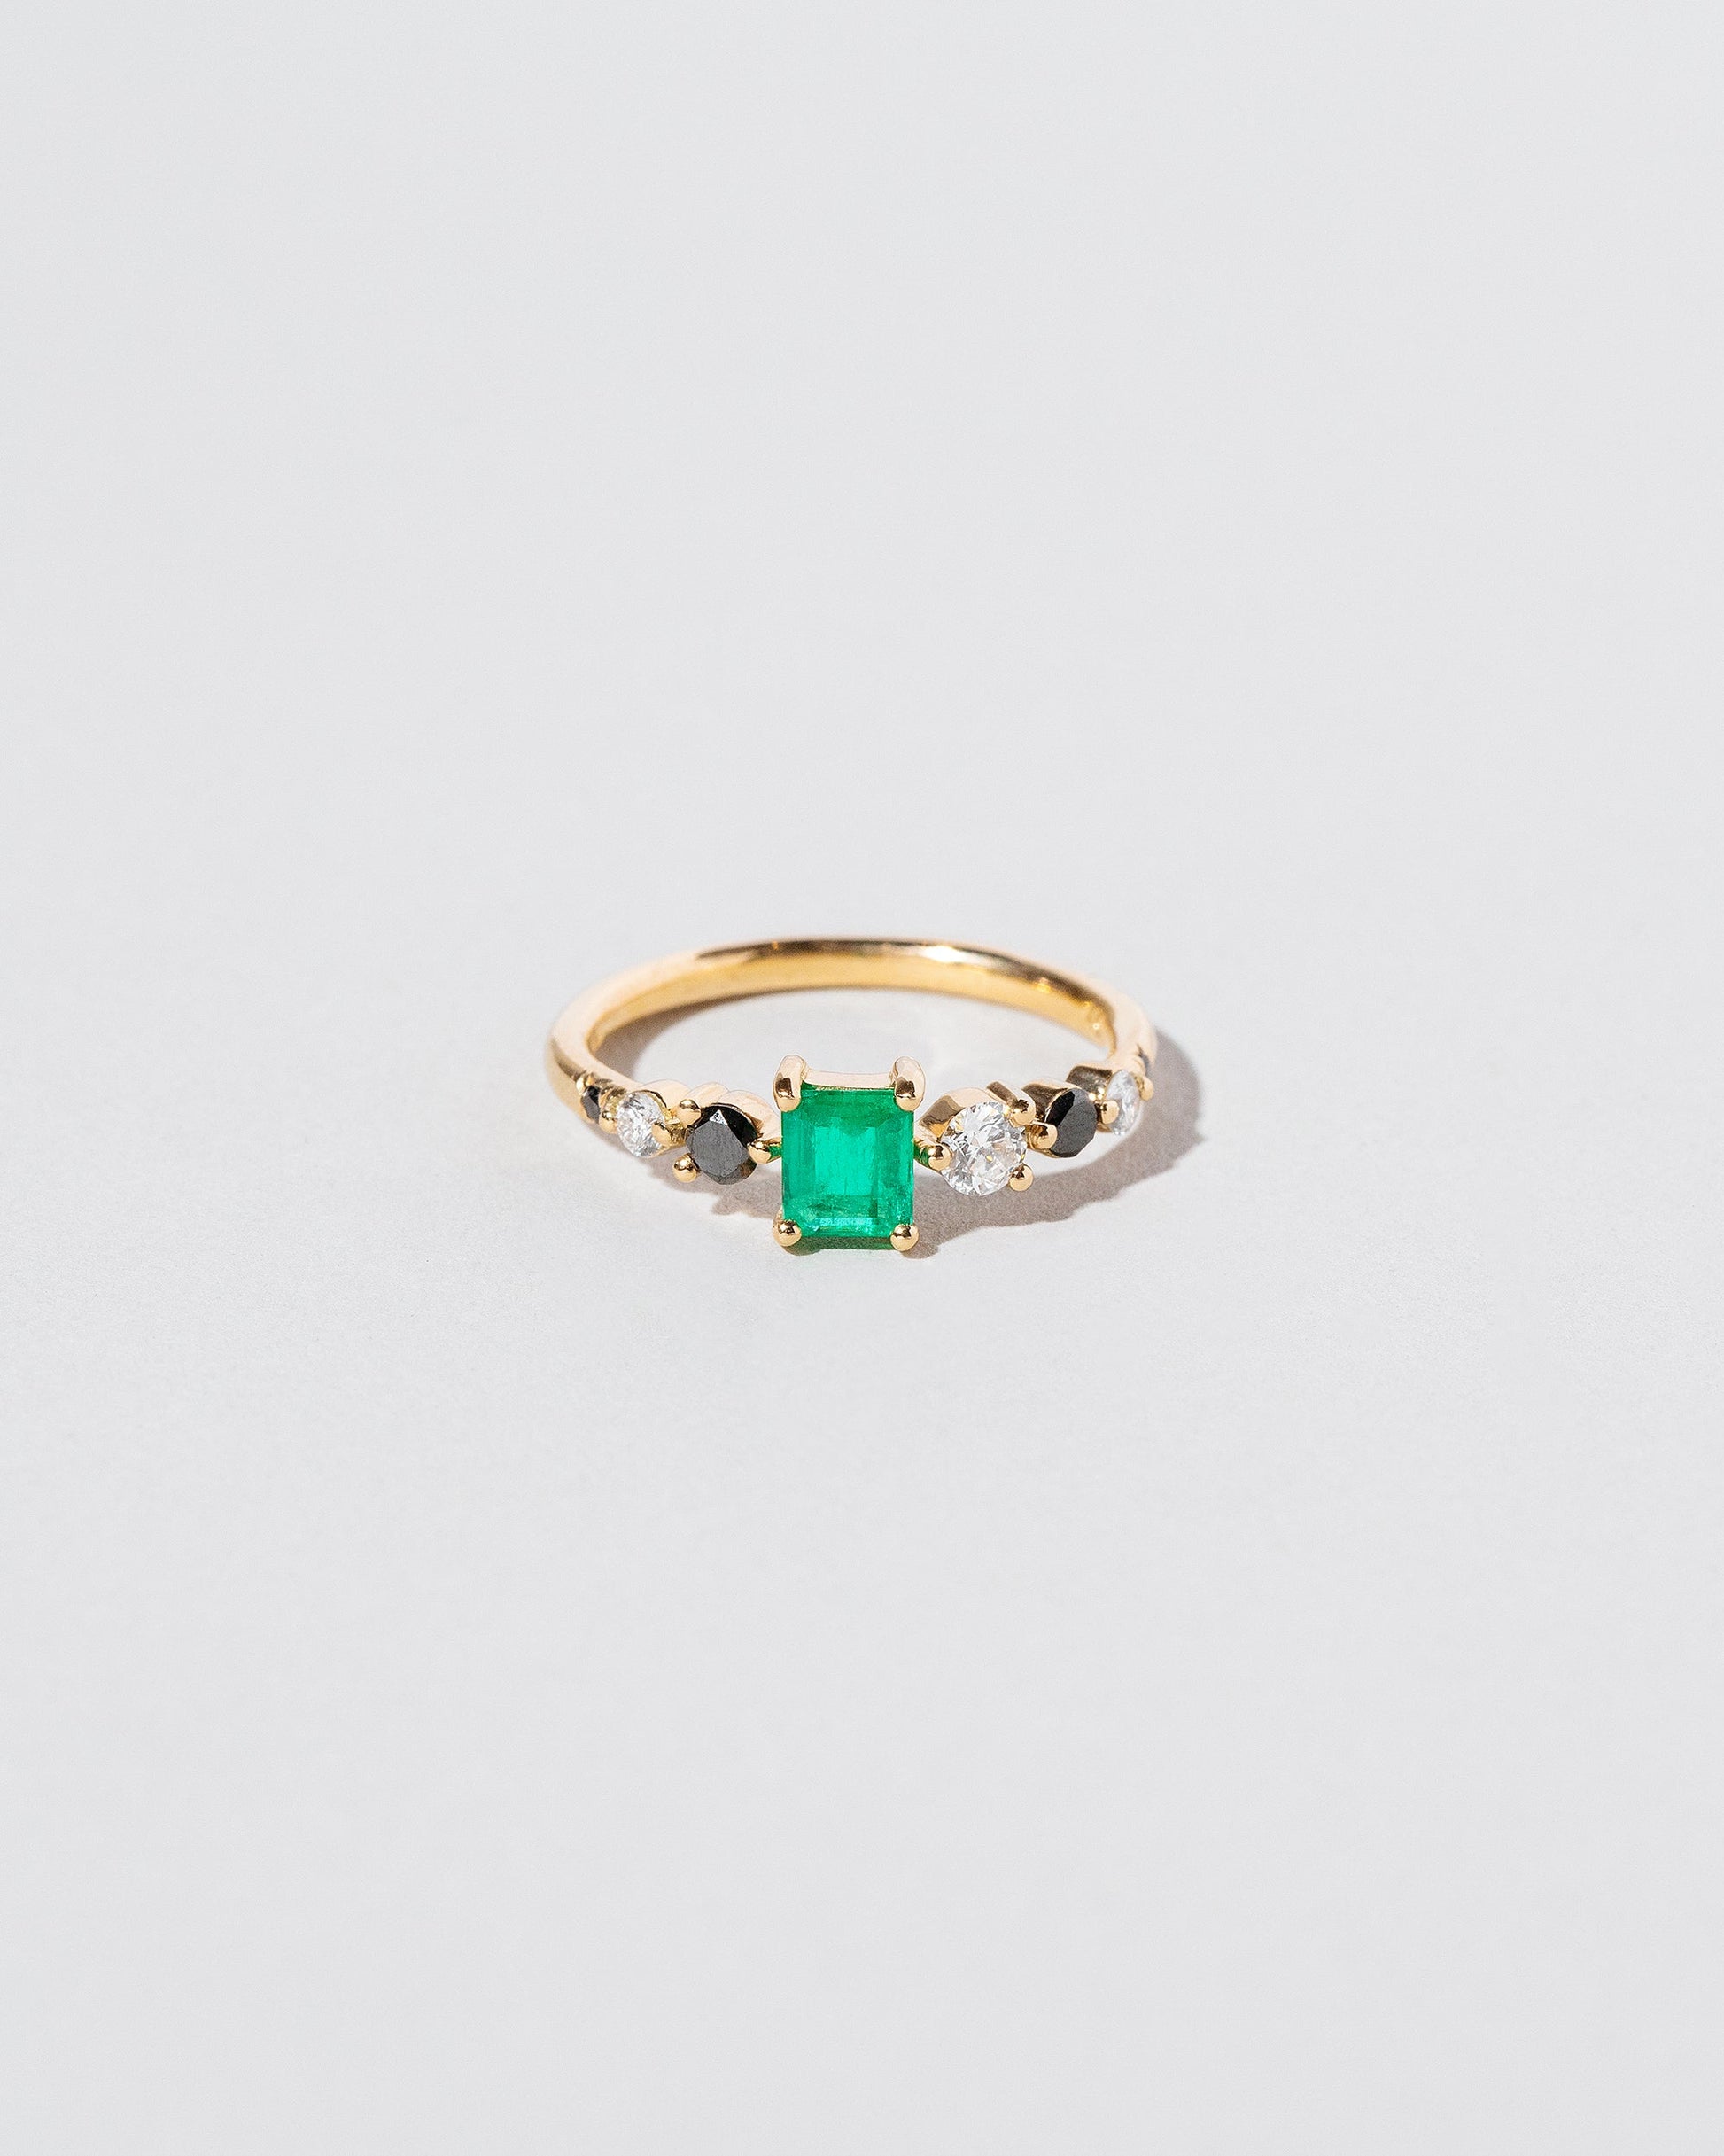  Seven Sisters Ring - Emerald on light color background.